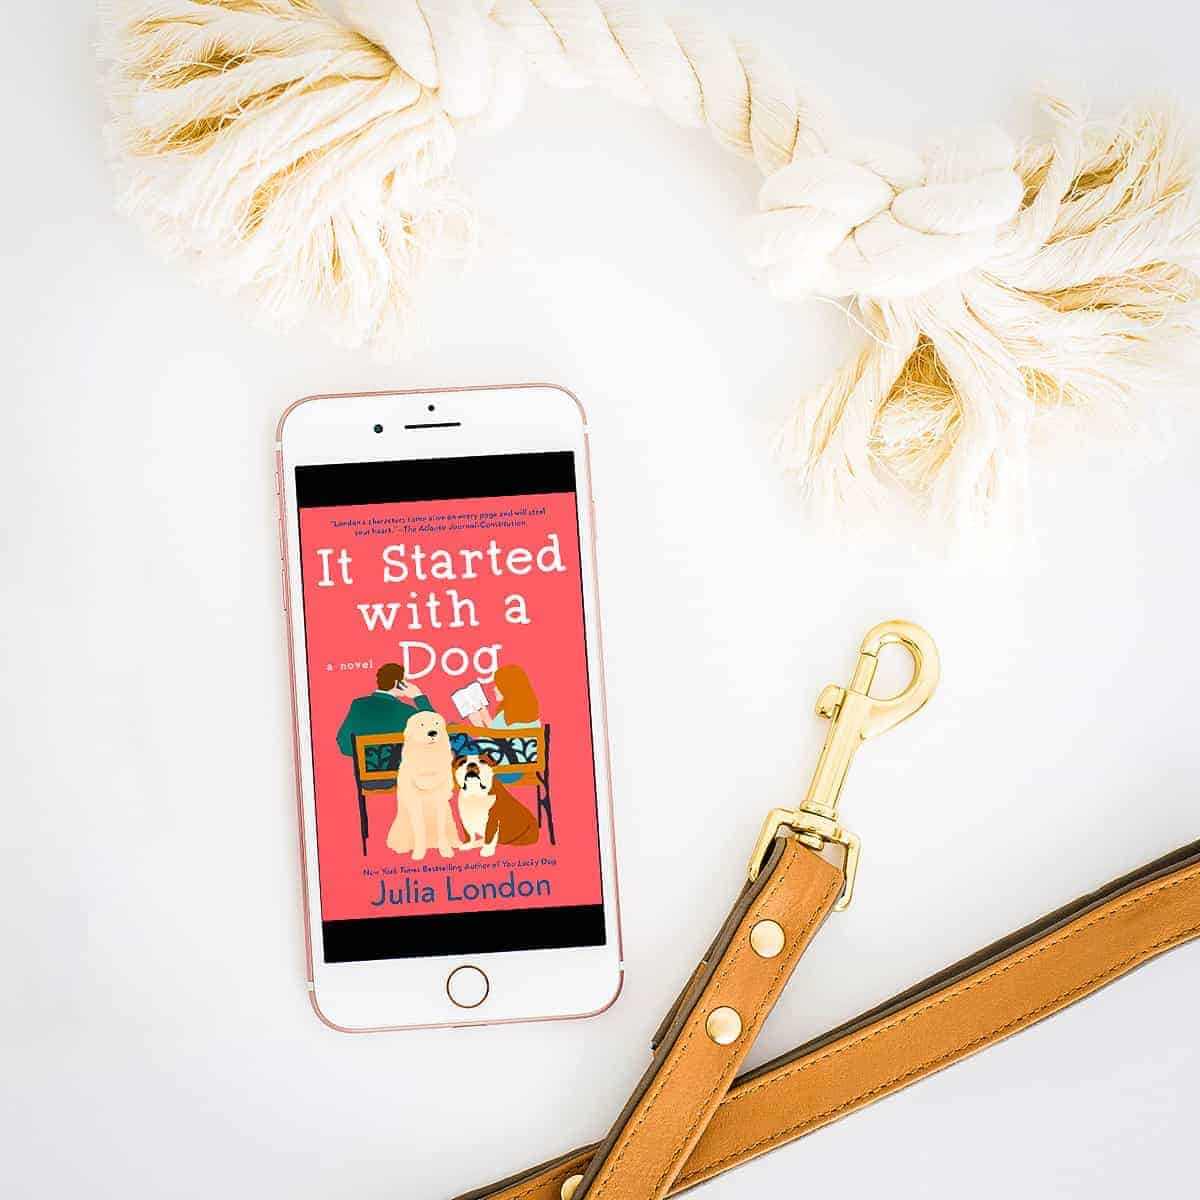 Check out an exclusive excerpt from It Started with a Dog by Julia London, a romance that starts with an accidental phone swap and features adorable rescue pups!